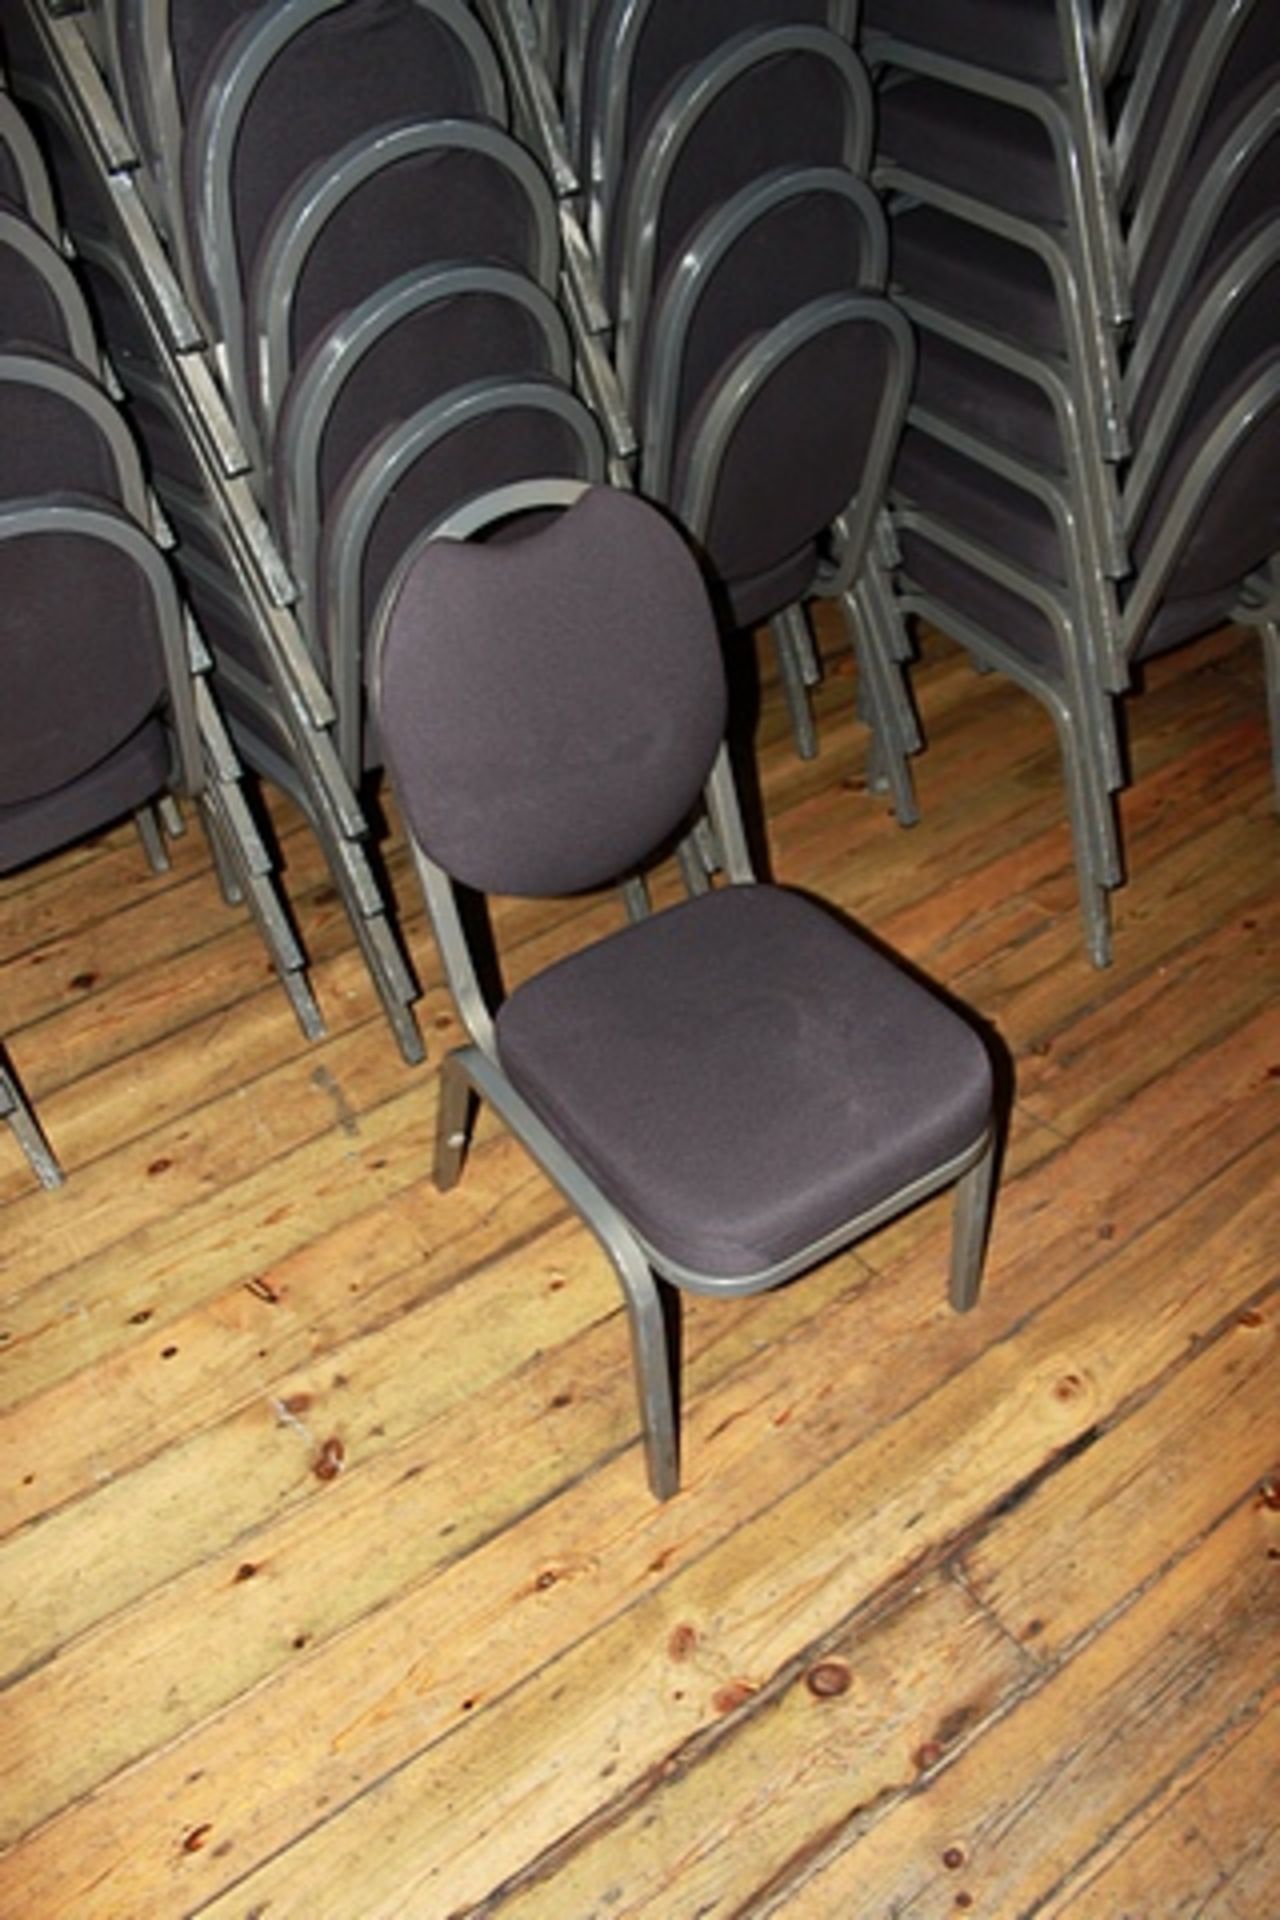 20 x Burgess Fiora stacking aluminium banquet chairs 420mm seat pitch x 870mm tall